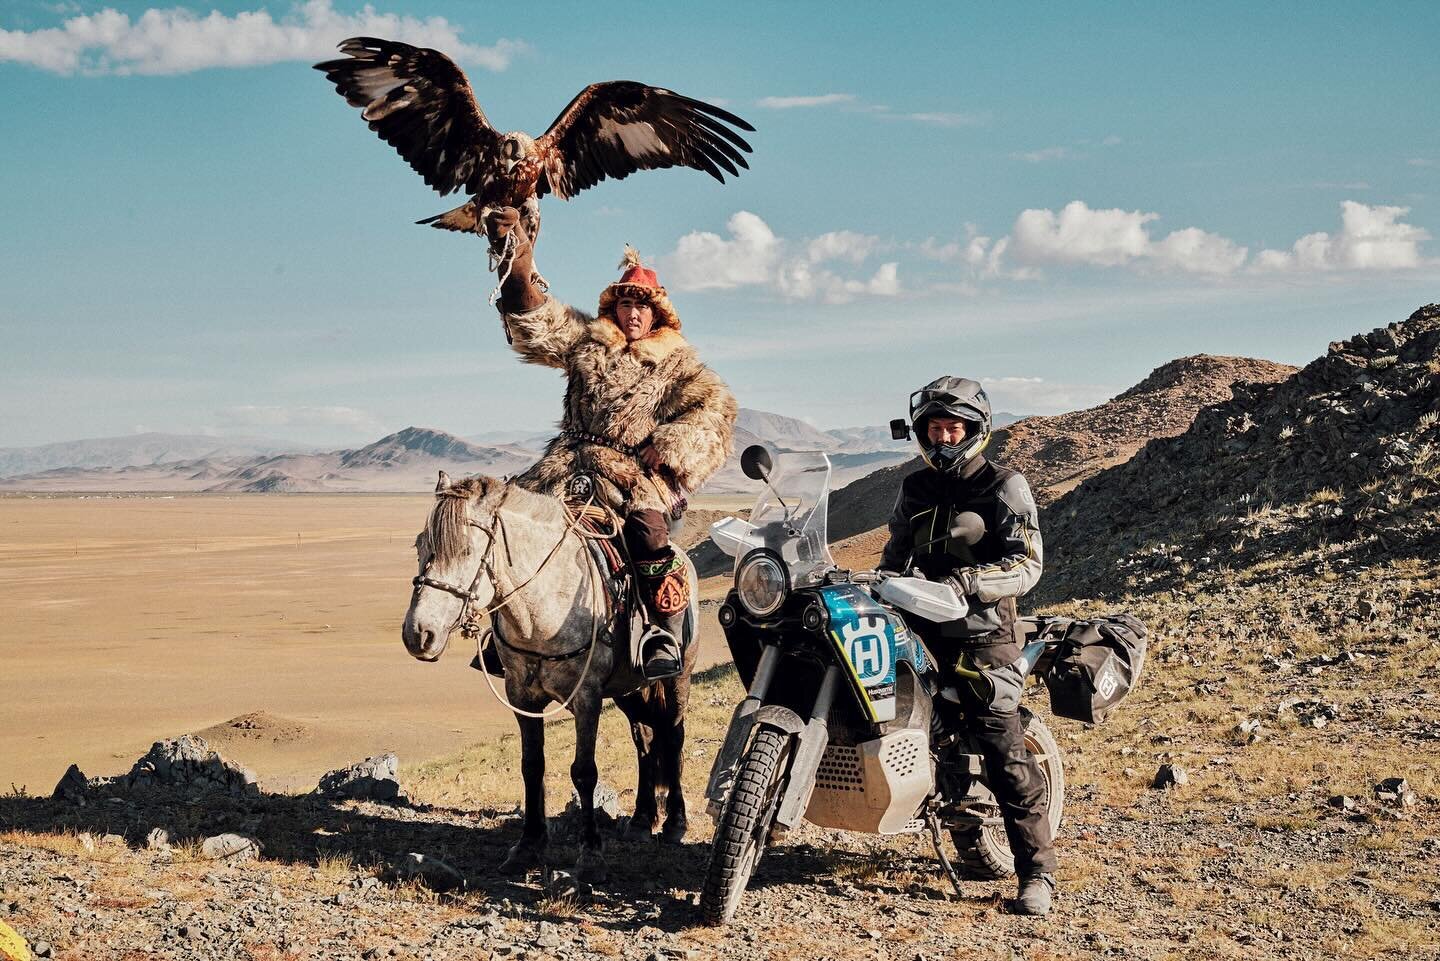 Discover the most remote parts of Western Mongolia 🇲🇳 during our EAGLE HUNTER EXPERIENCE, while riding the outstanding NORDEN 901 EXPEDITION. No desires are left behind on this one-of-a-kind adventure bike. 

We do have some limited seats left duri